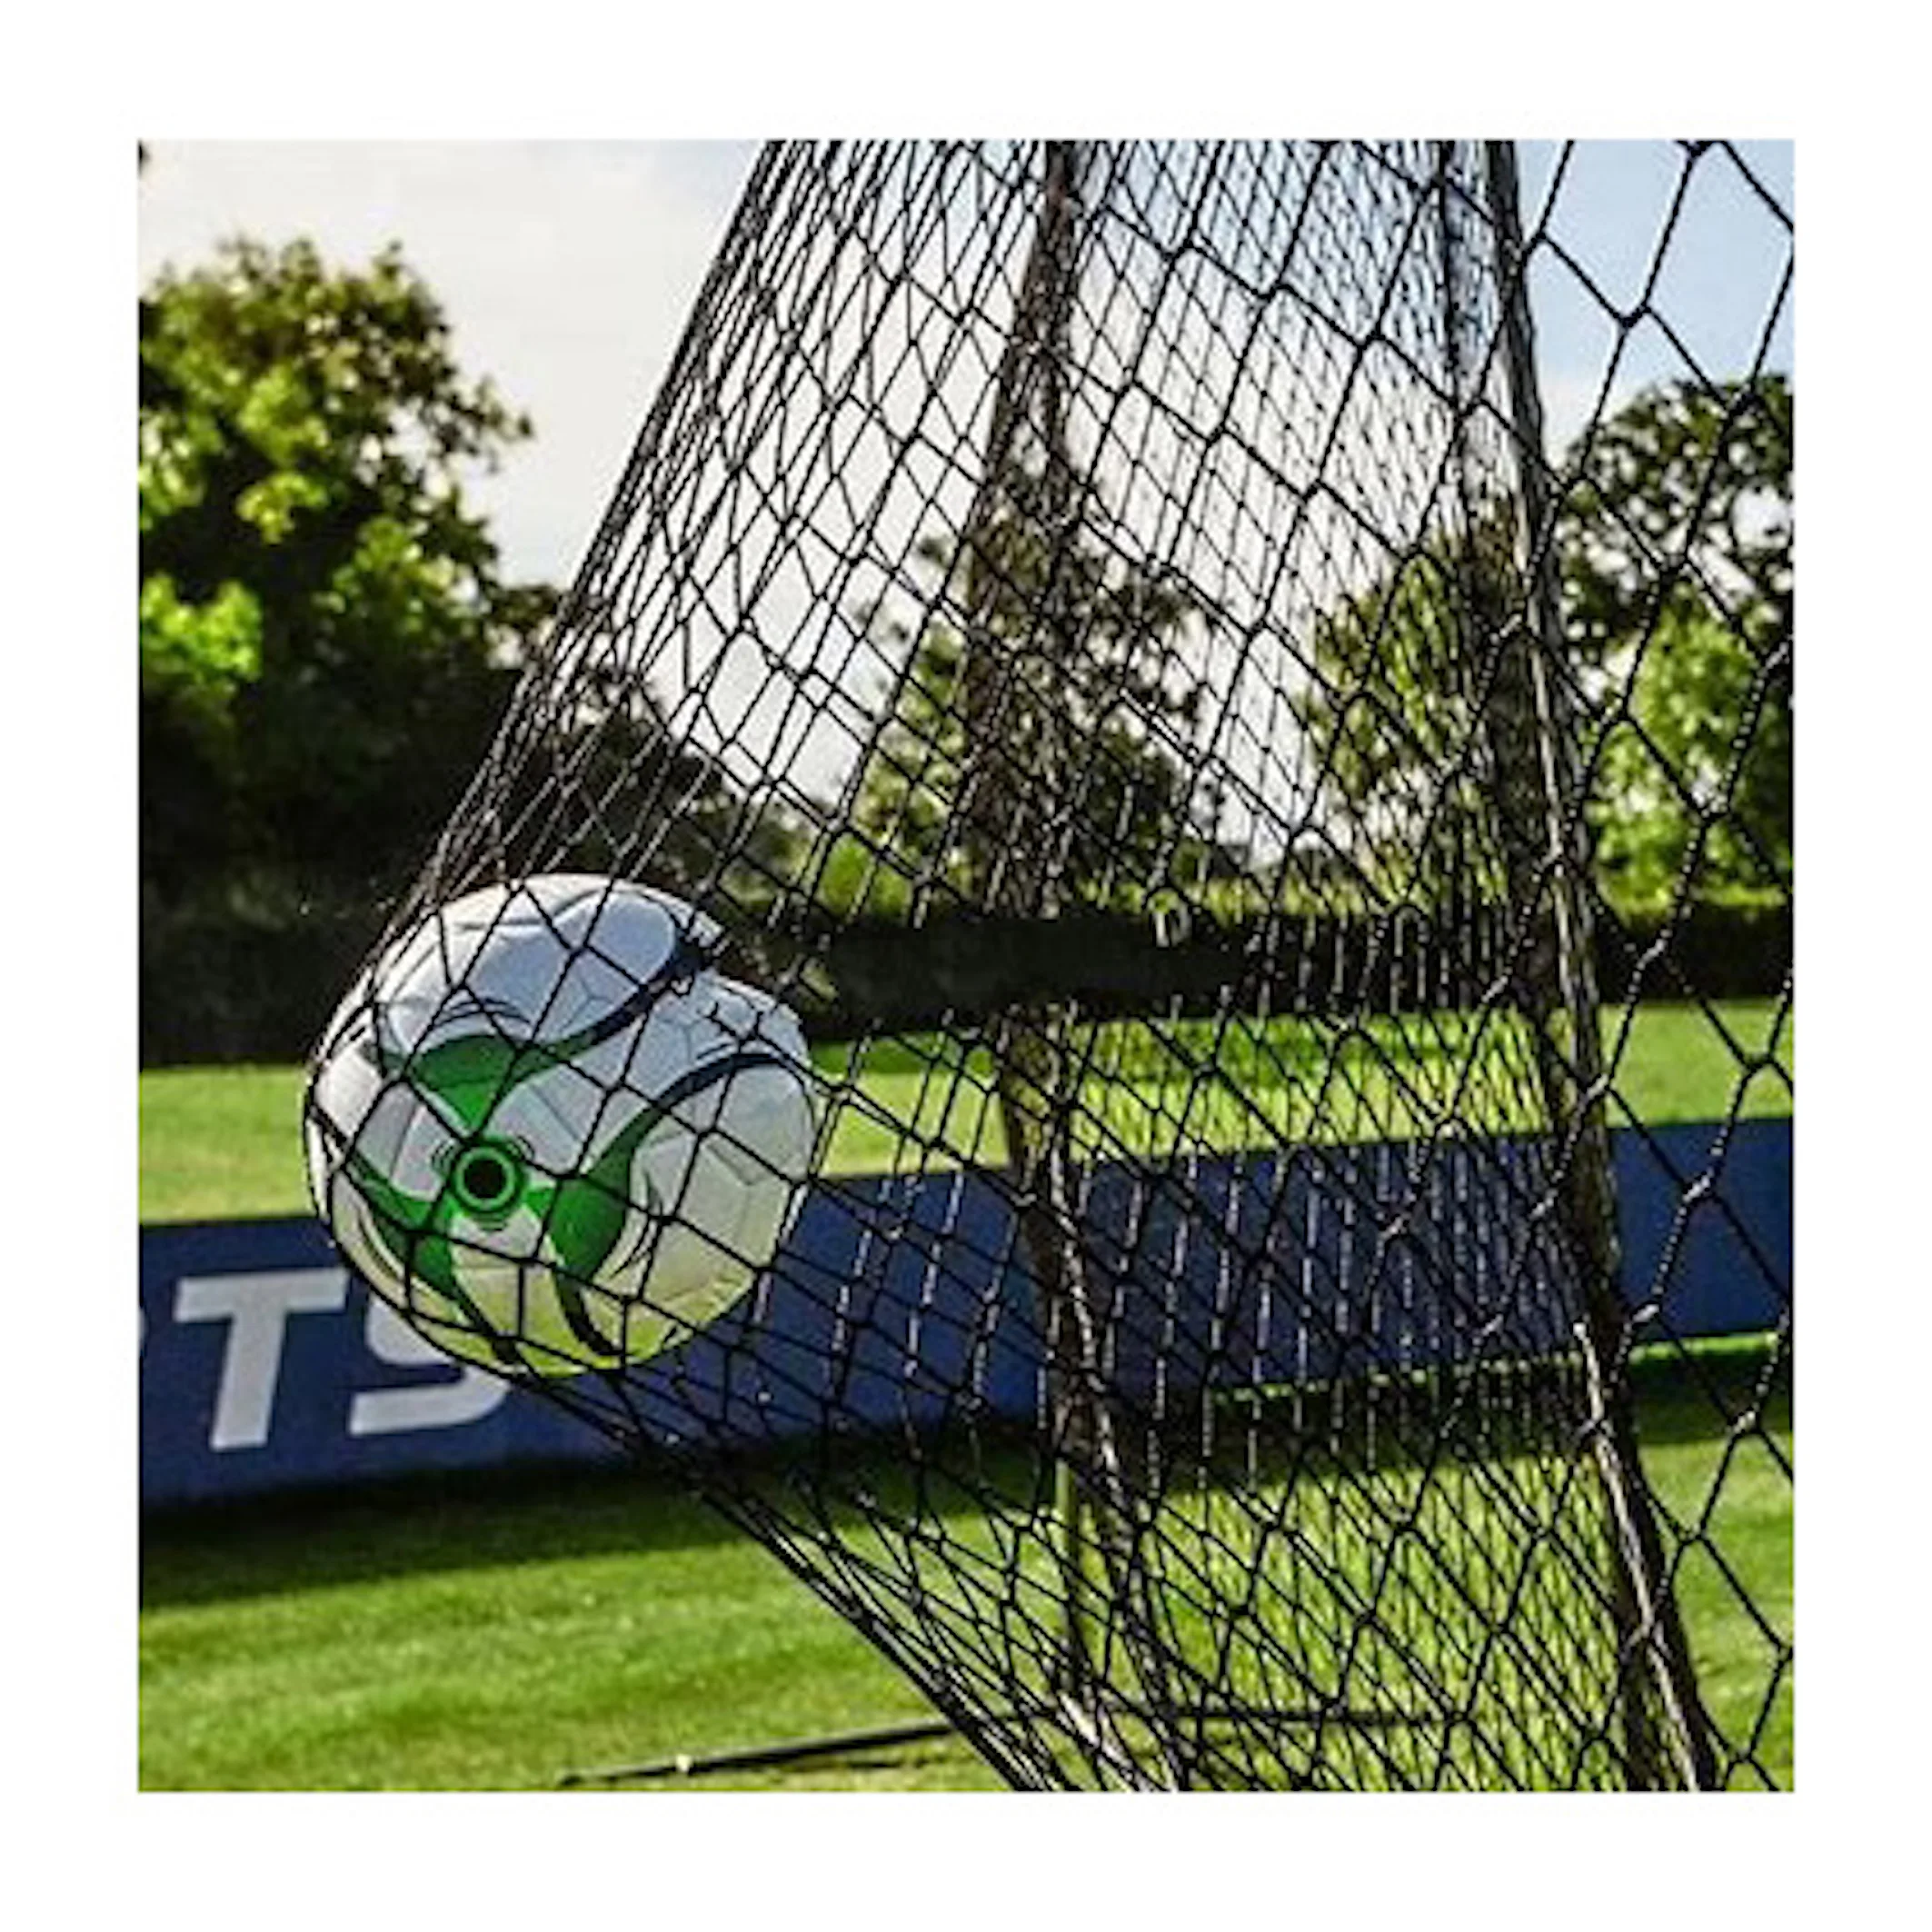 Wholesale Protection sport net exit multi sport net portable sport outdoor basketball nets From m.alibaba